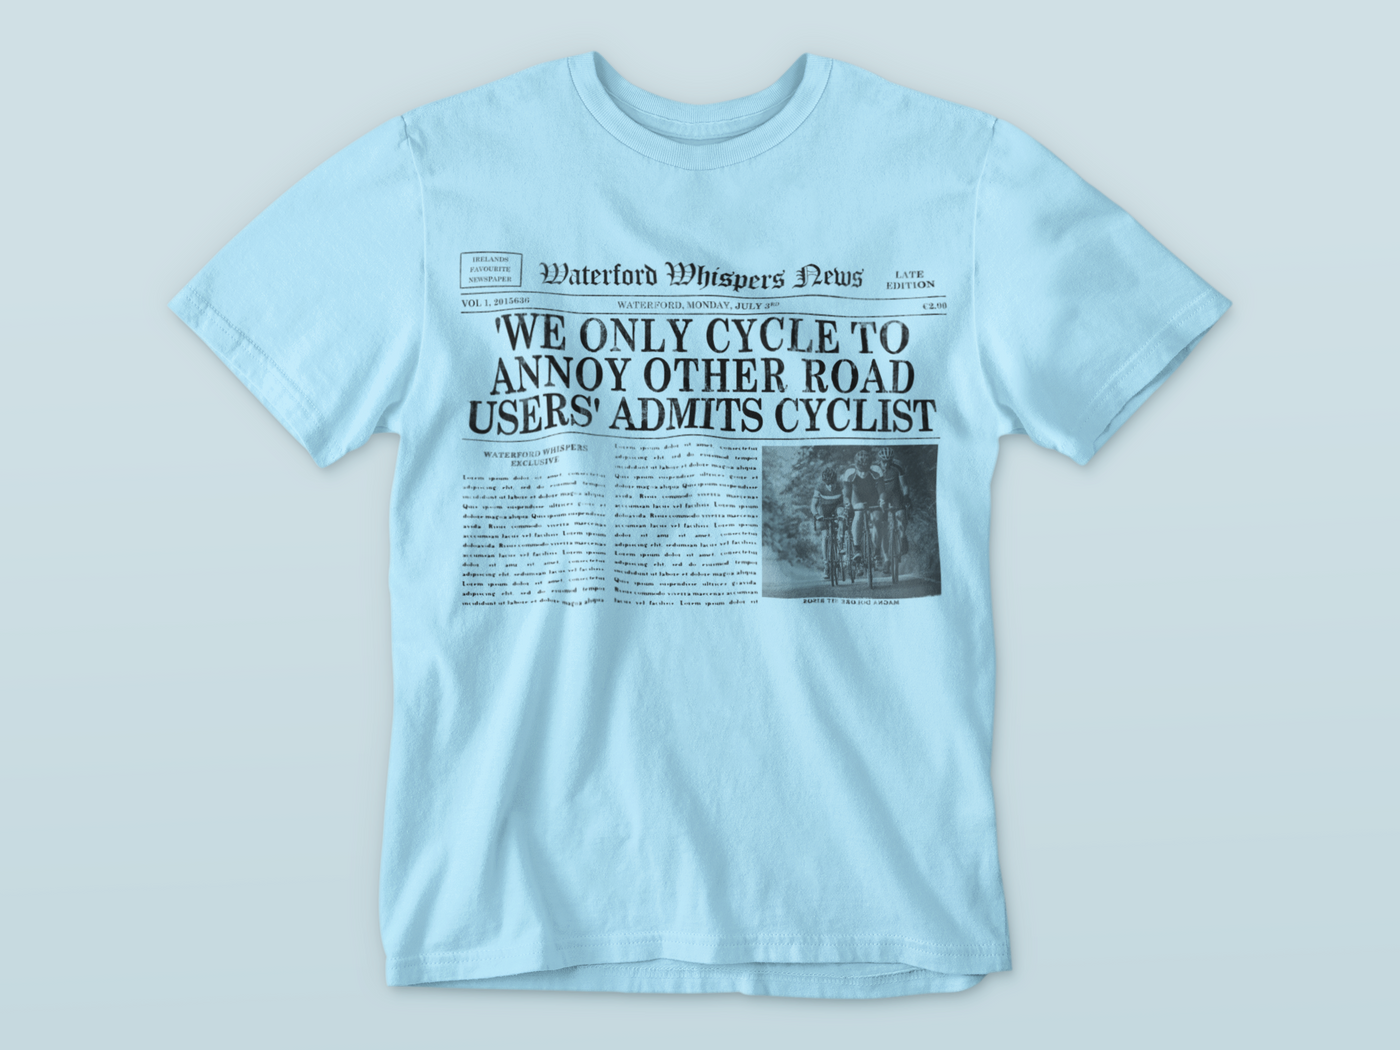 'We Only Cycle To Annoy Other Road Users' Admits Cyclist - Premium WWN T-shirt